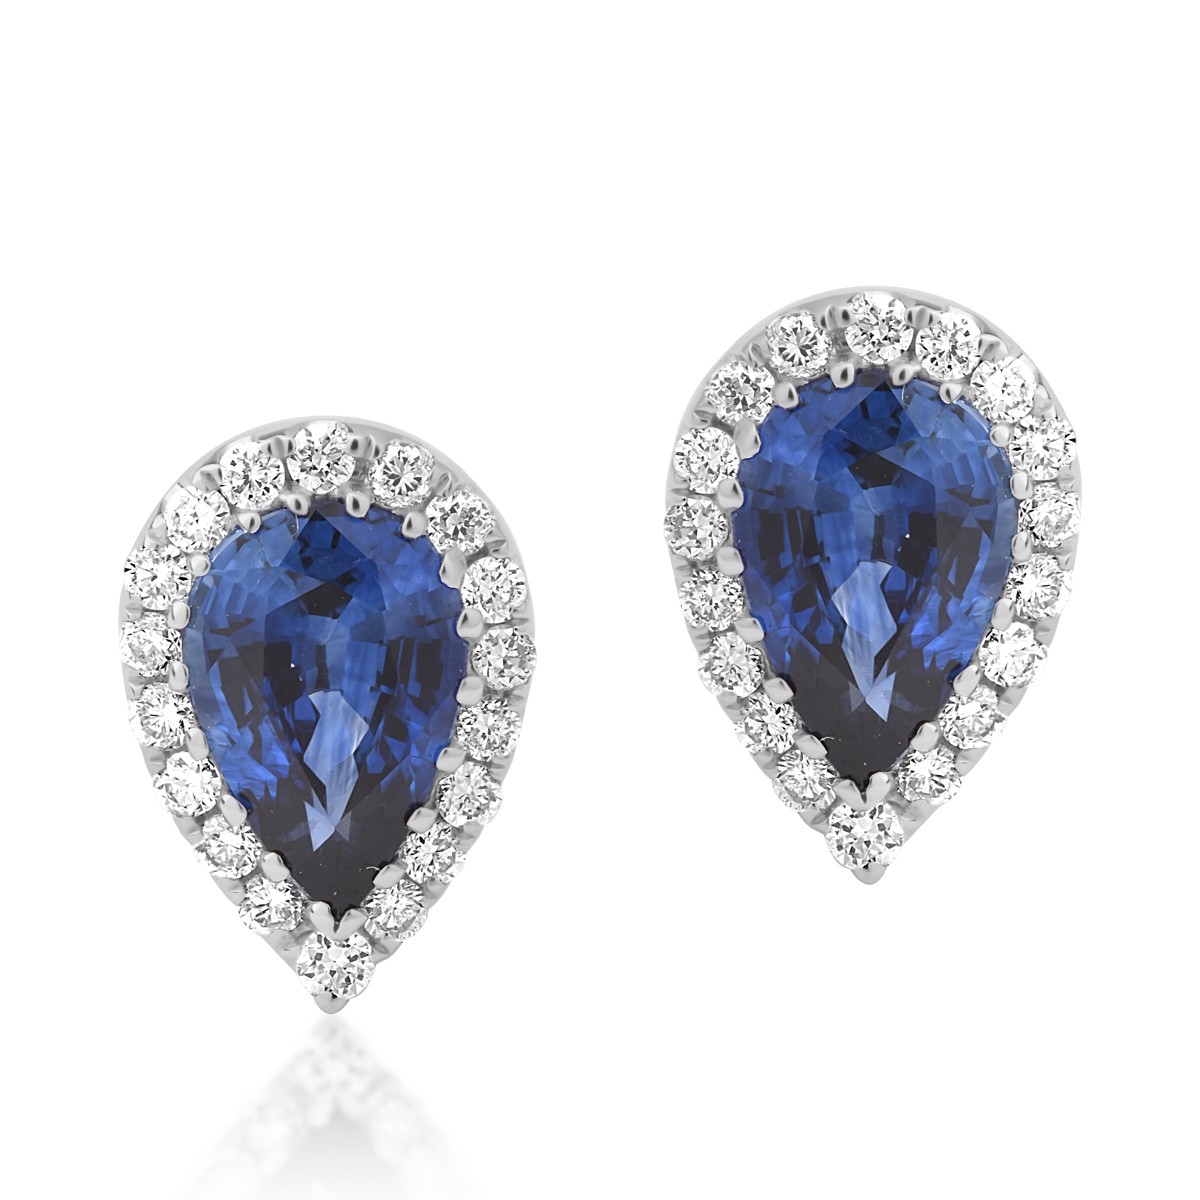 18K white gold earrings with sapphires of 0.9ct and diamonds of 0.14ct